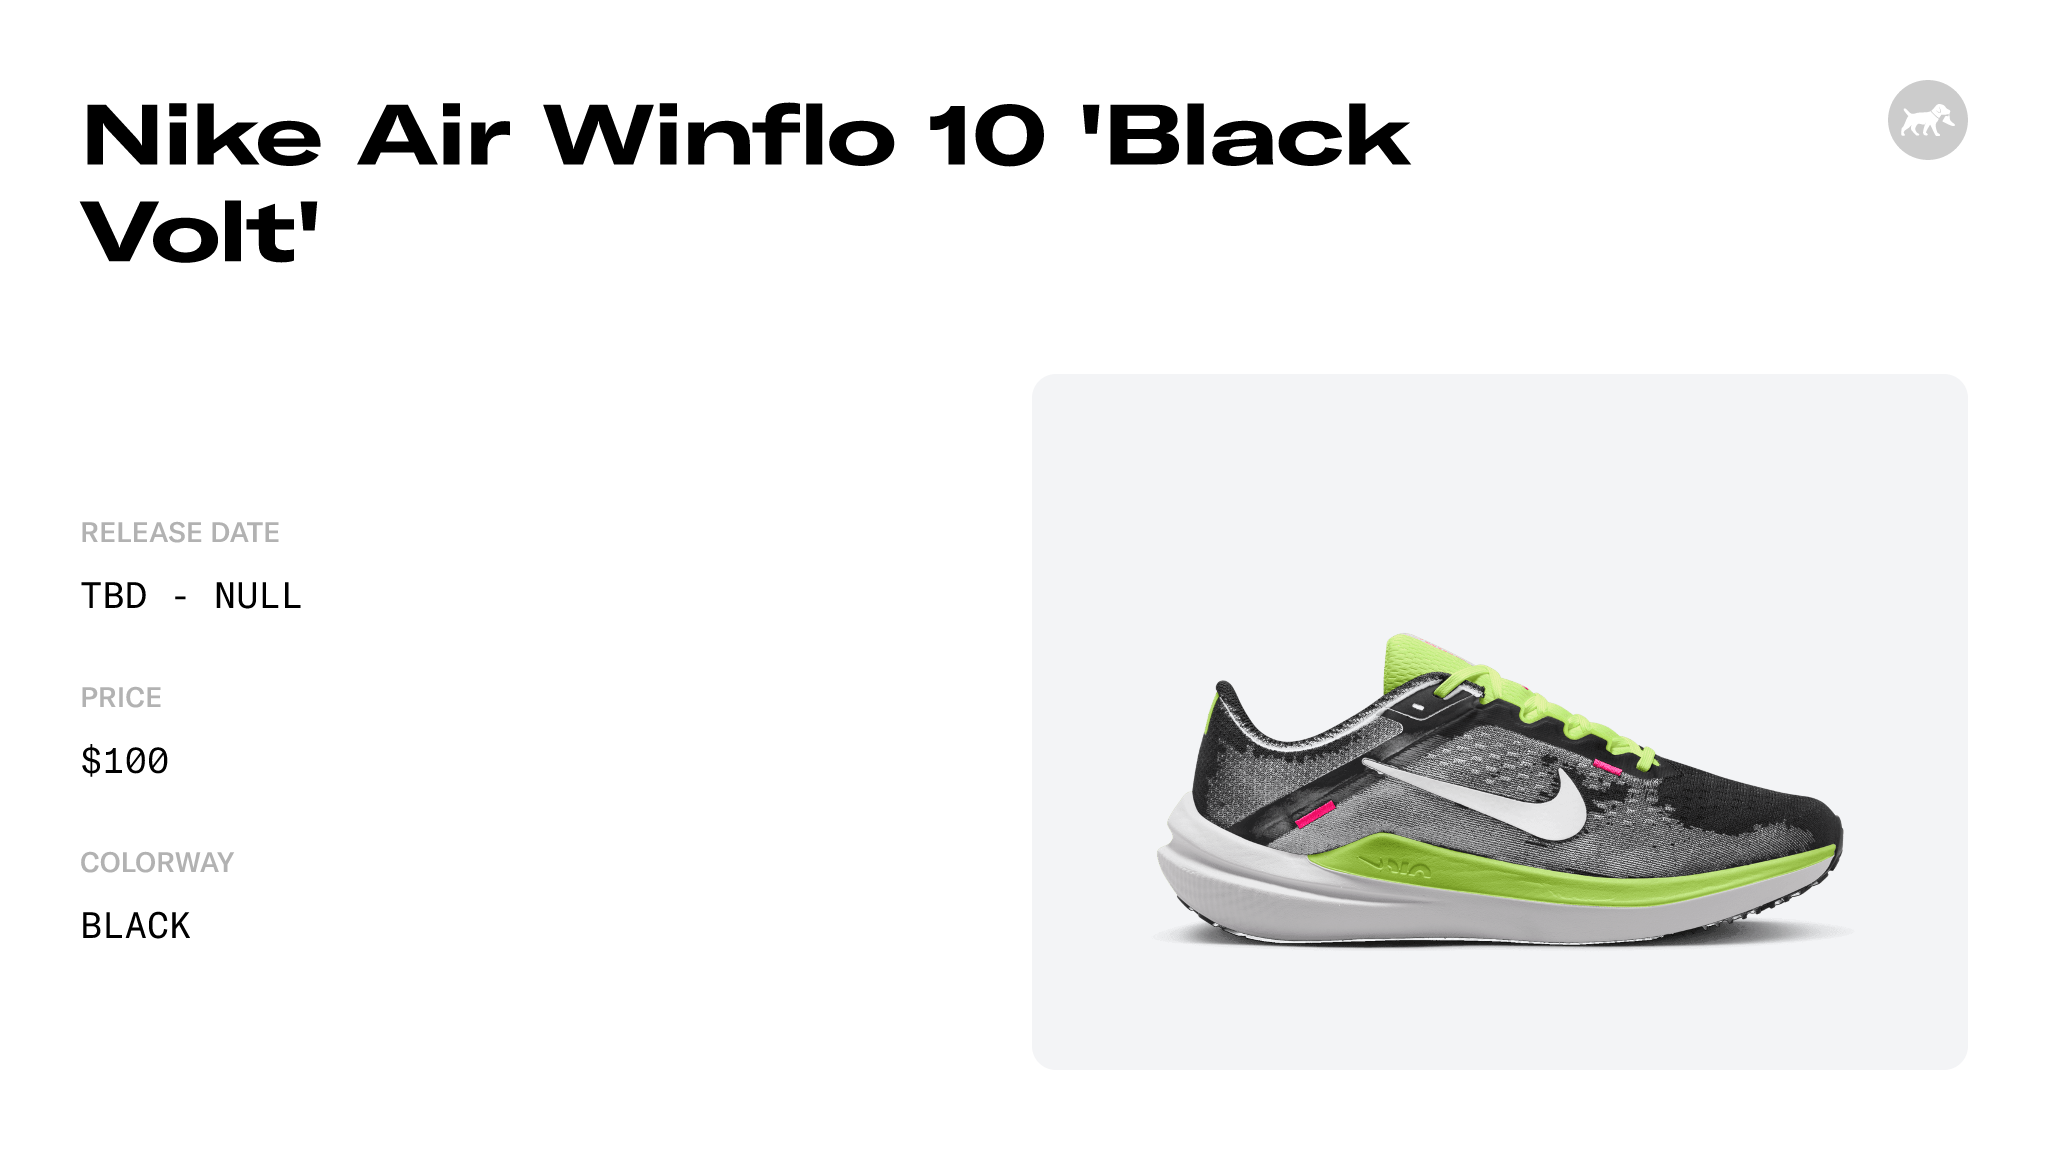 Nike Air Winflo 10 'Black Volt' - FN6825-010 Raffles and Release Date